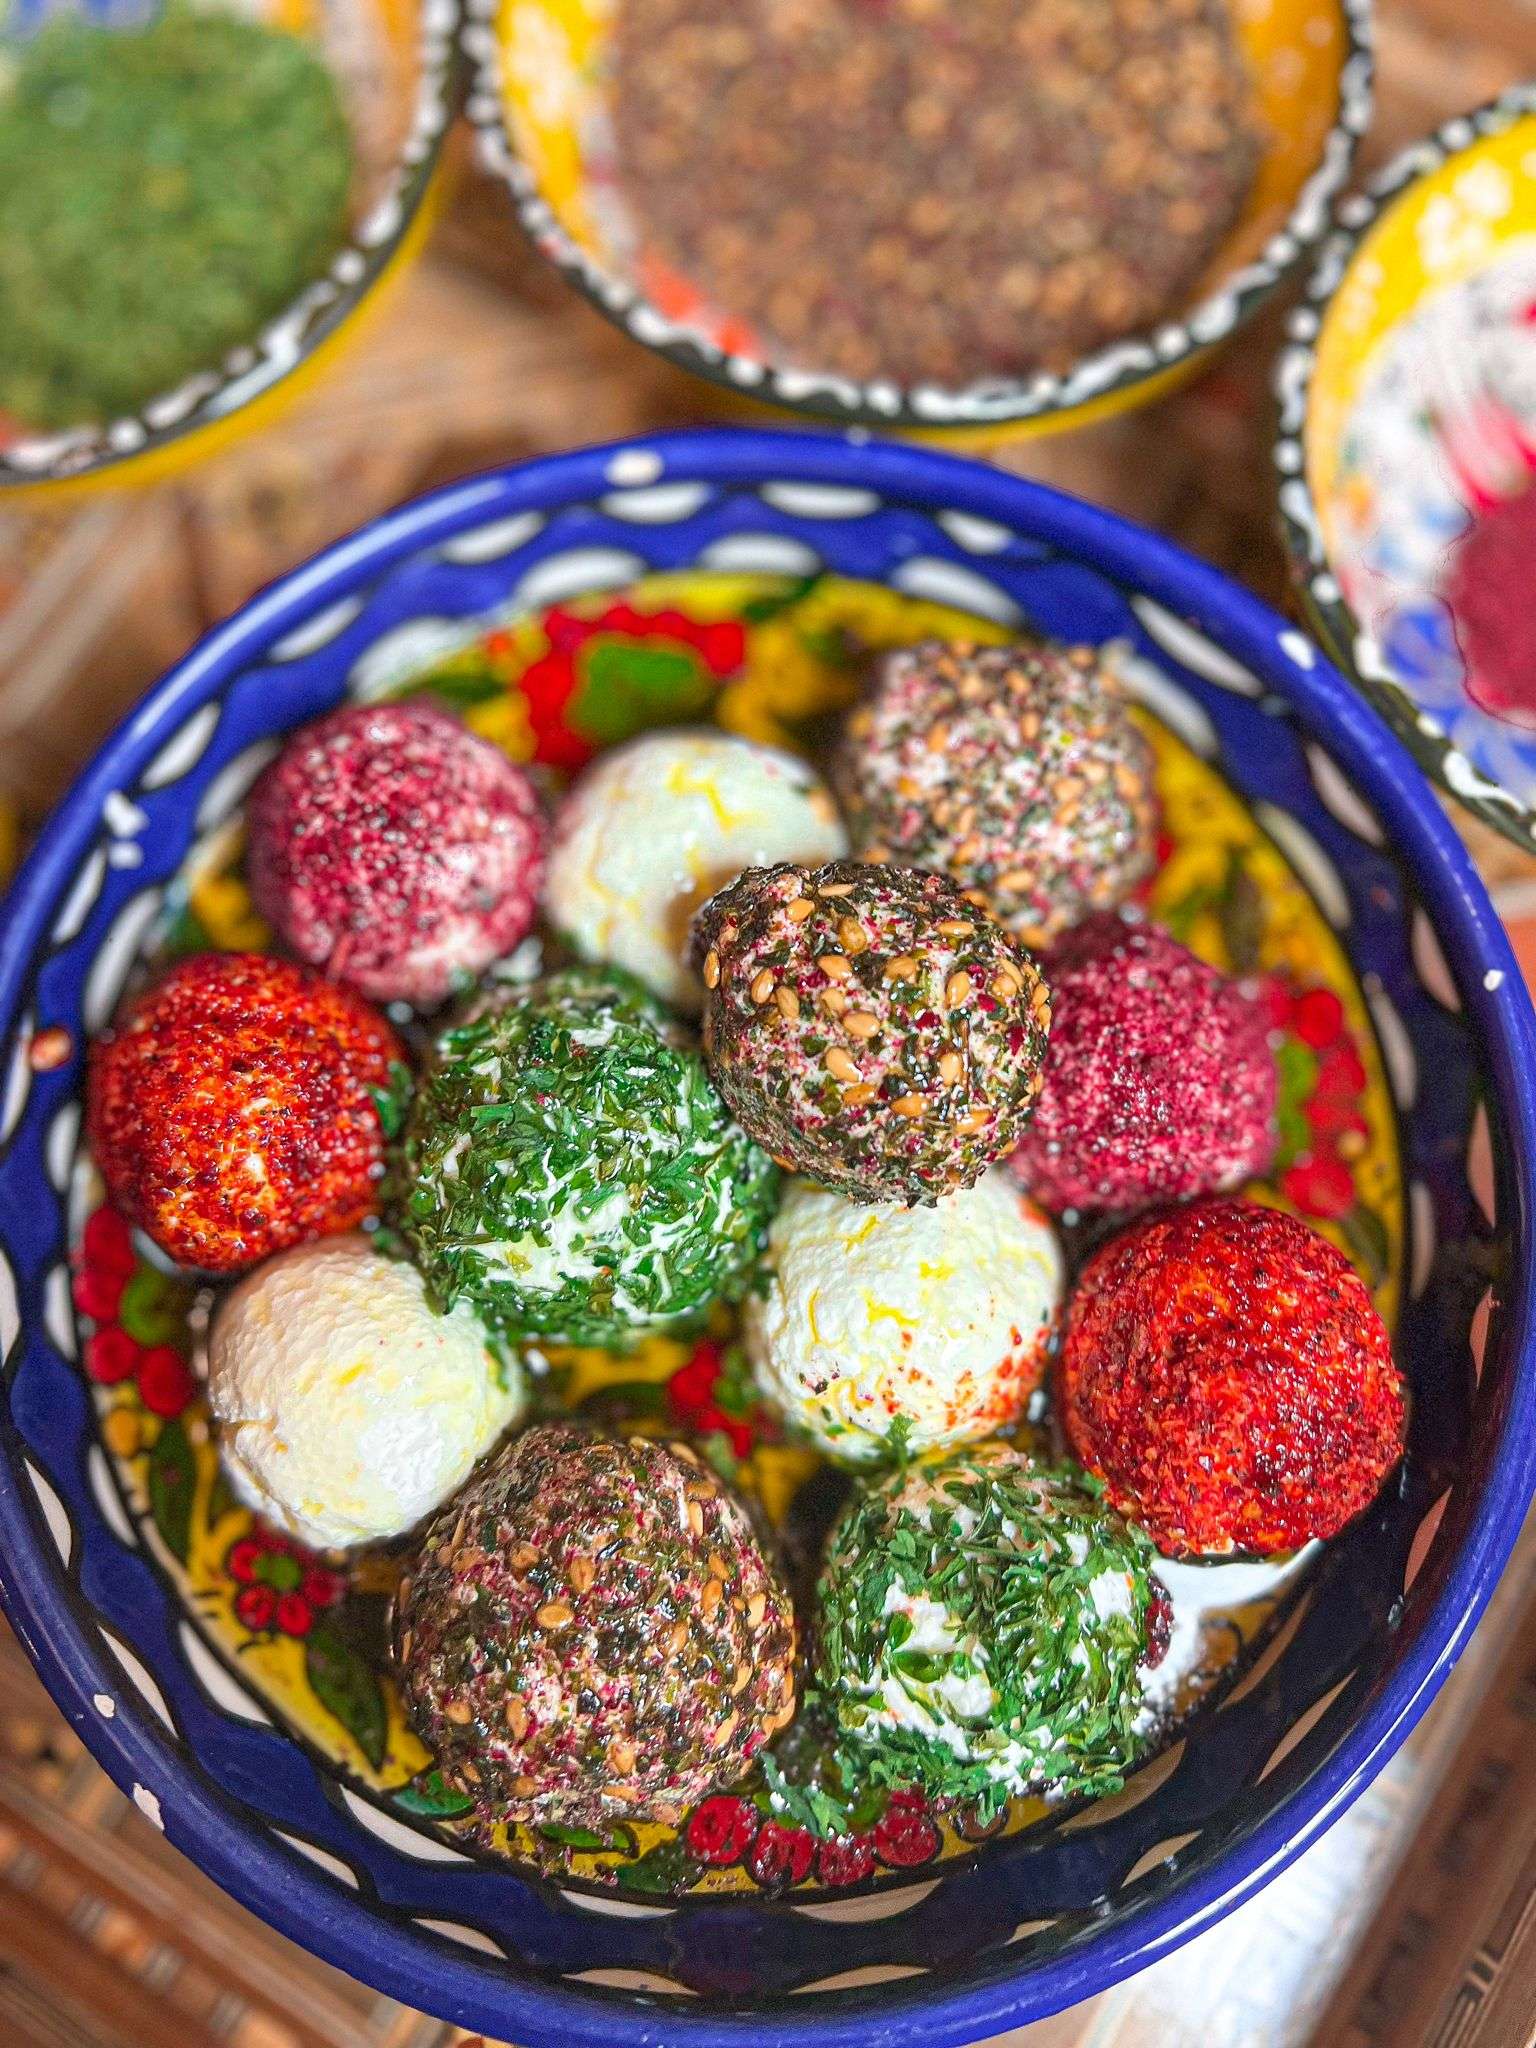 Authentic Labneh Balls coated in delicious earthy spices and herbs like zaatar, sumac, Aleppo pepper, and parsley